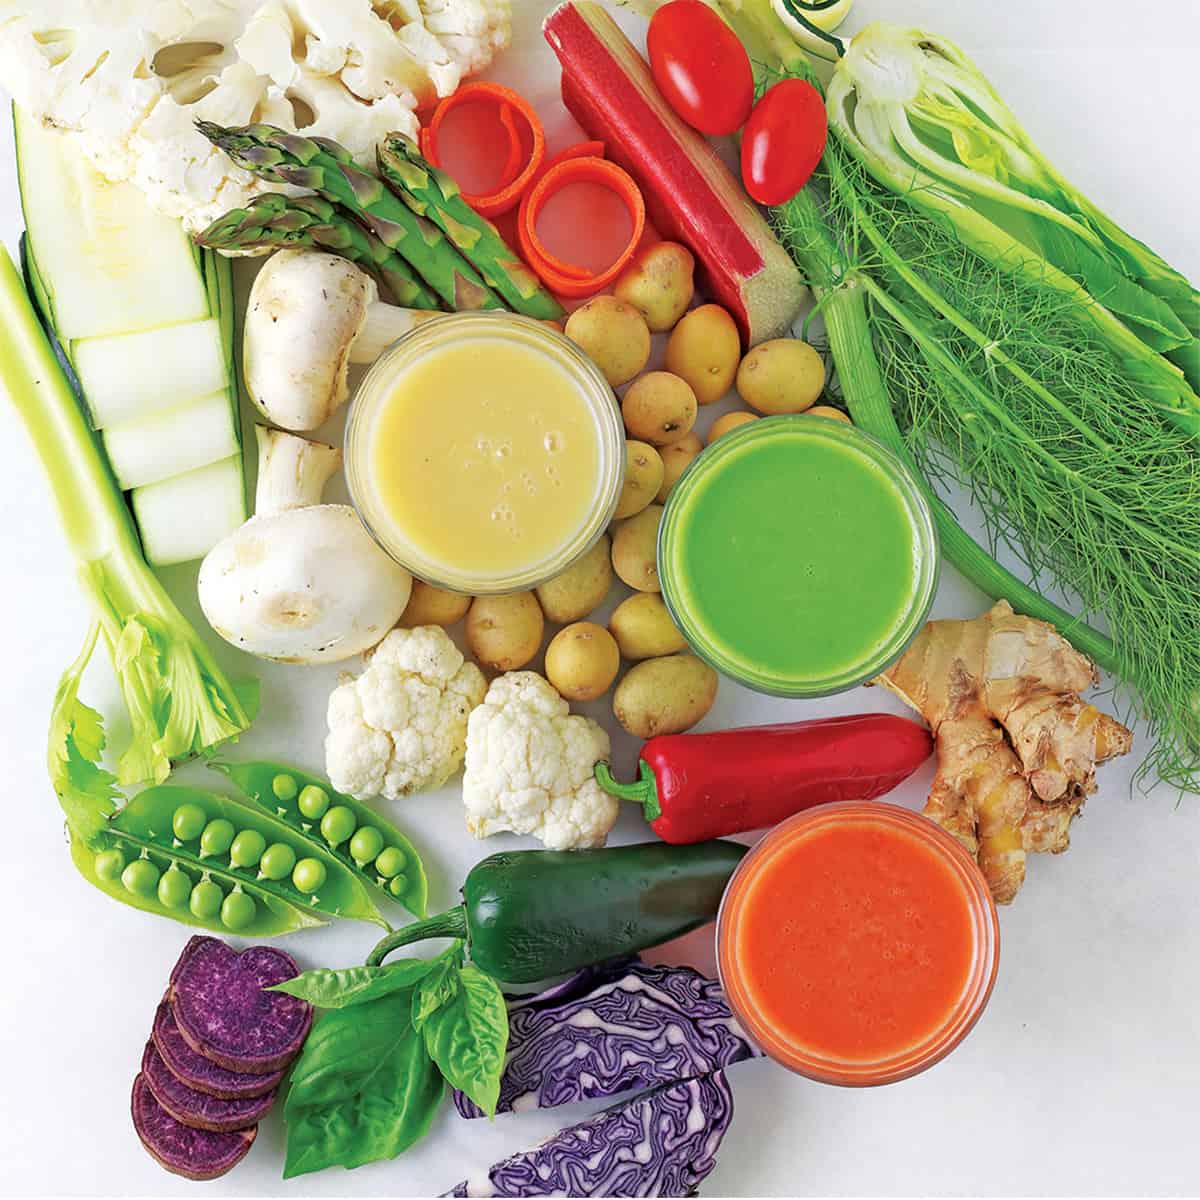 collections of vegetables for smoothies.